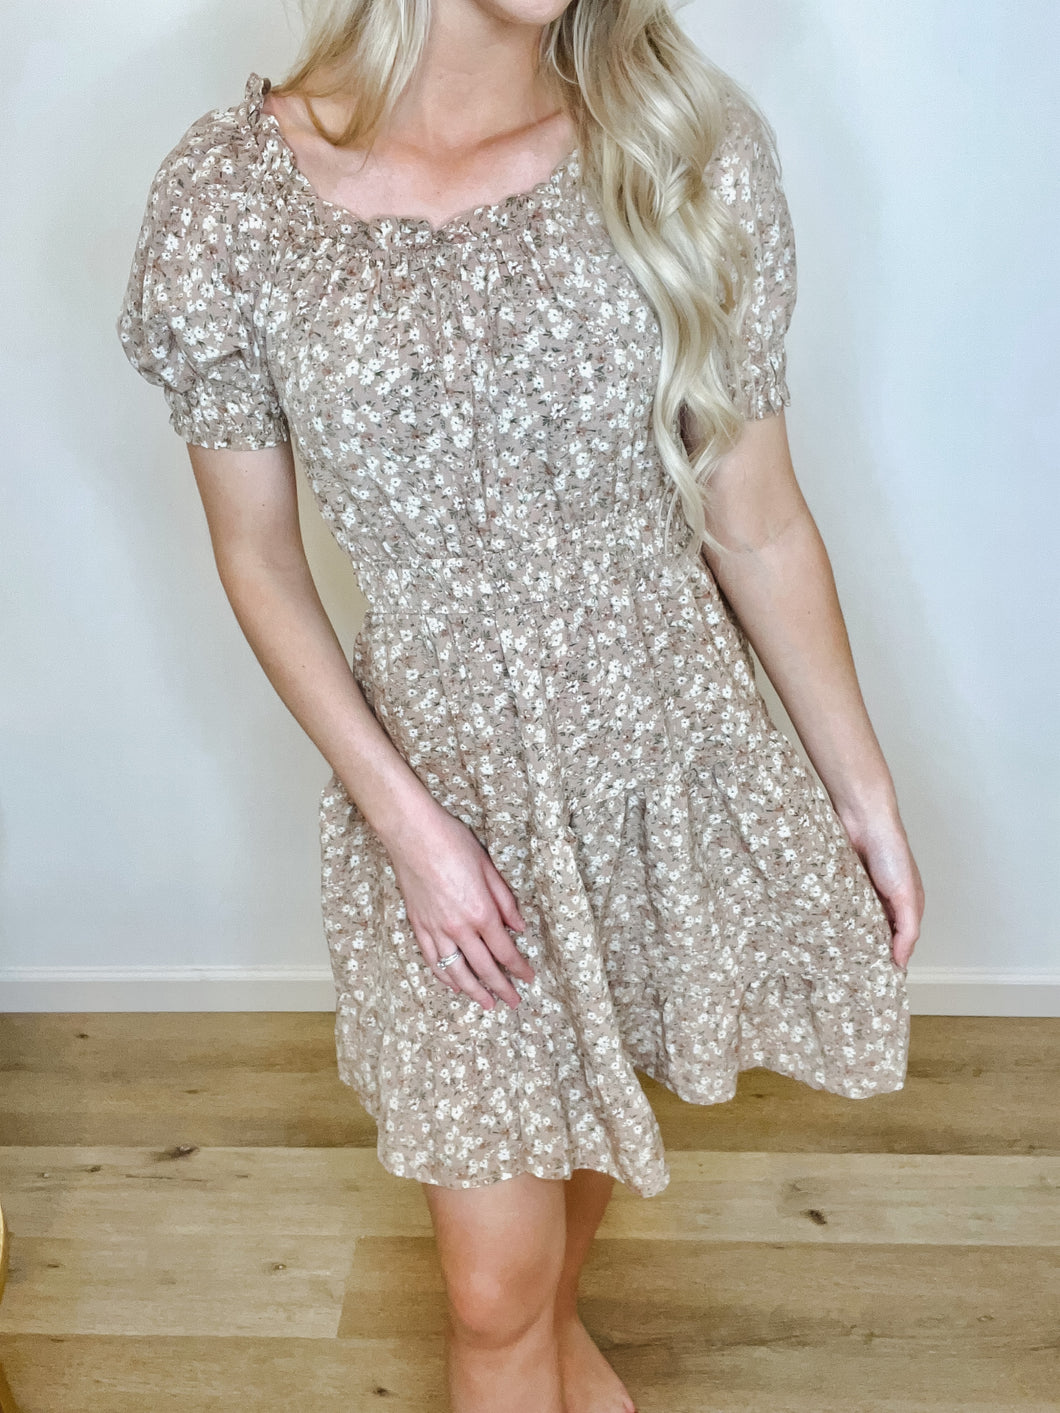 Cocoa Floral Dress